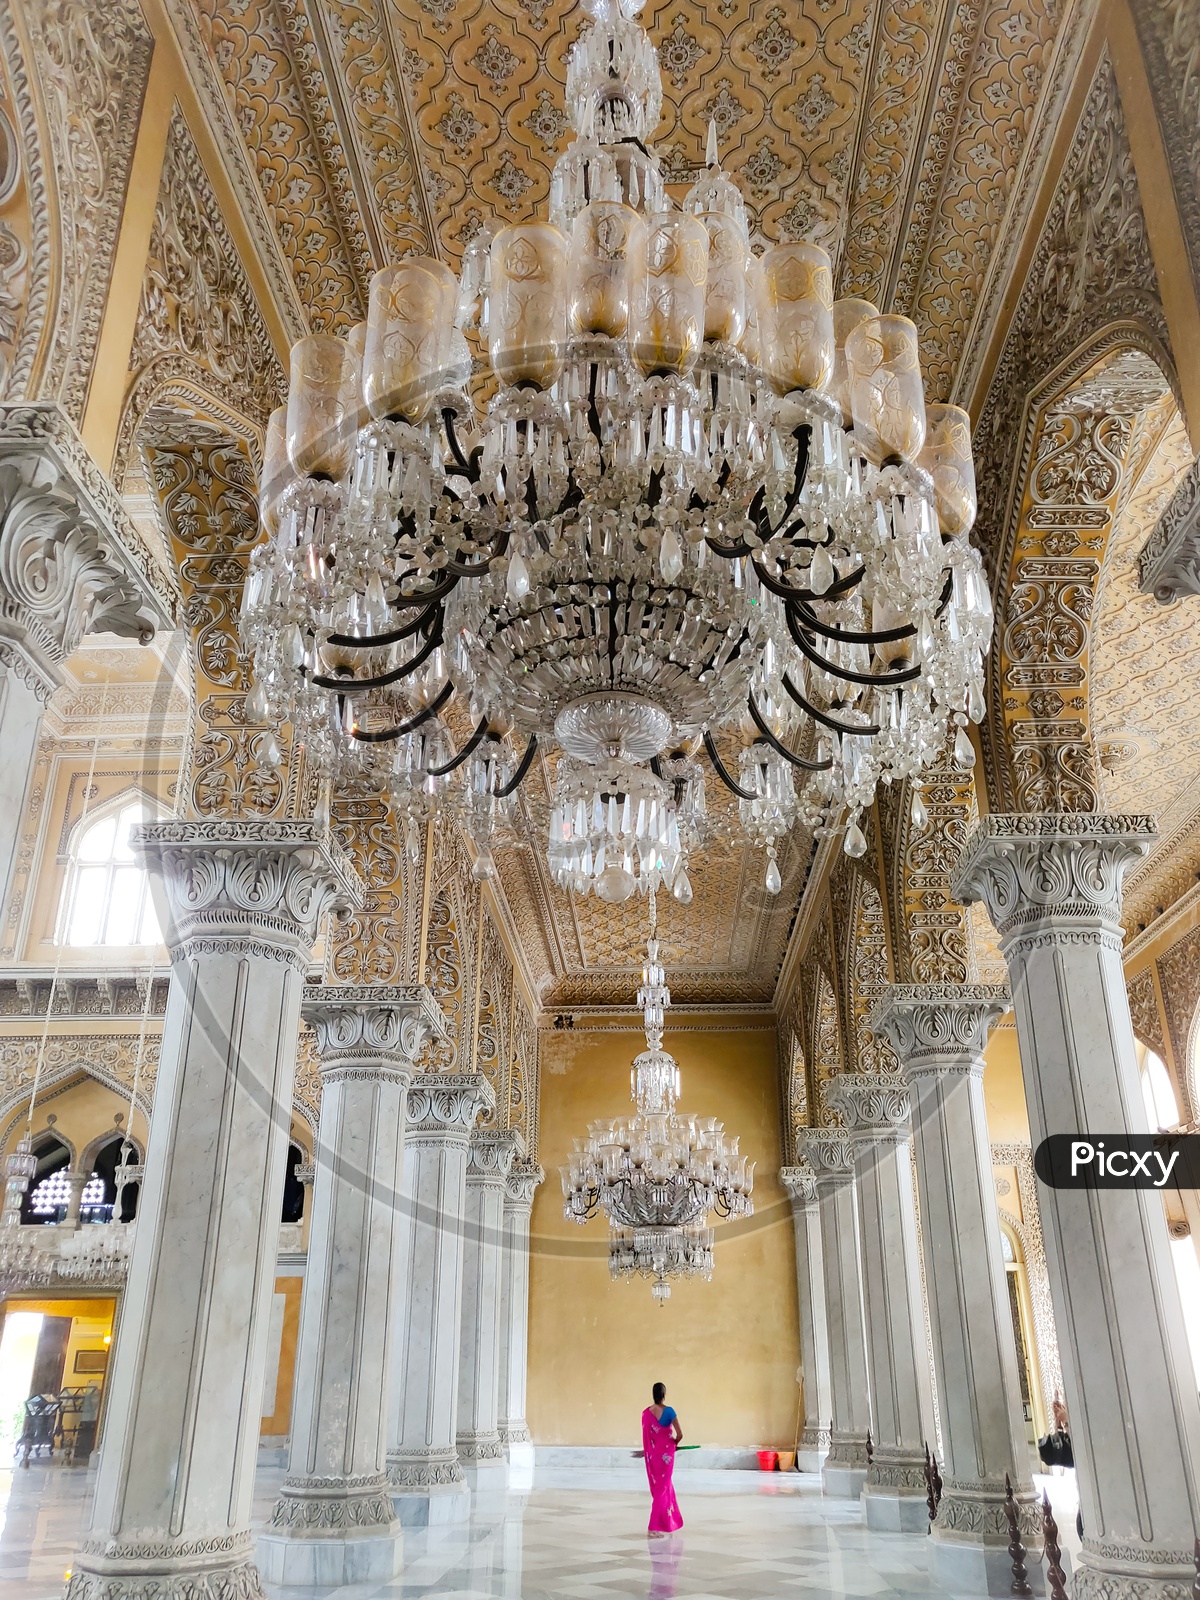 Interiors of Chowmahalla Palace with Chandeliers